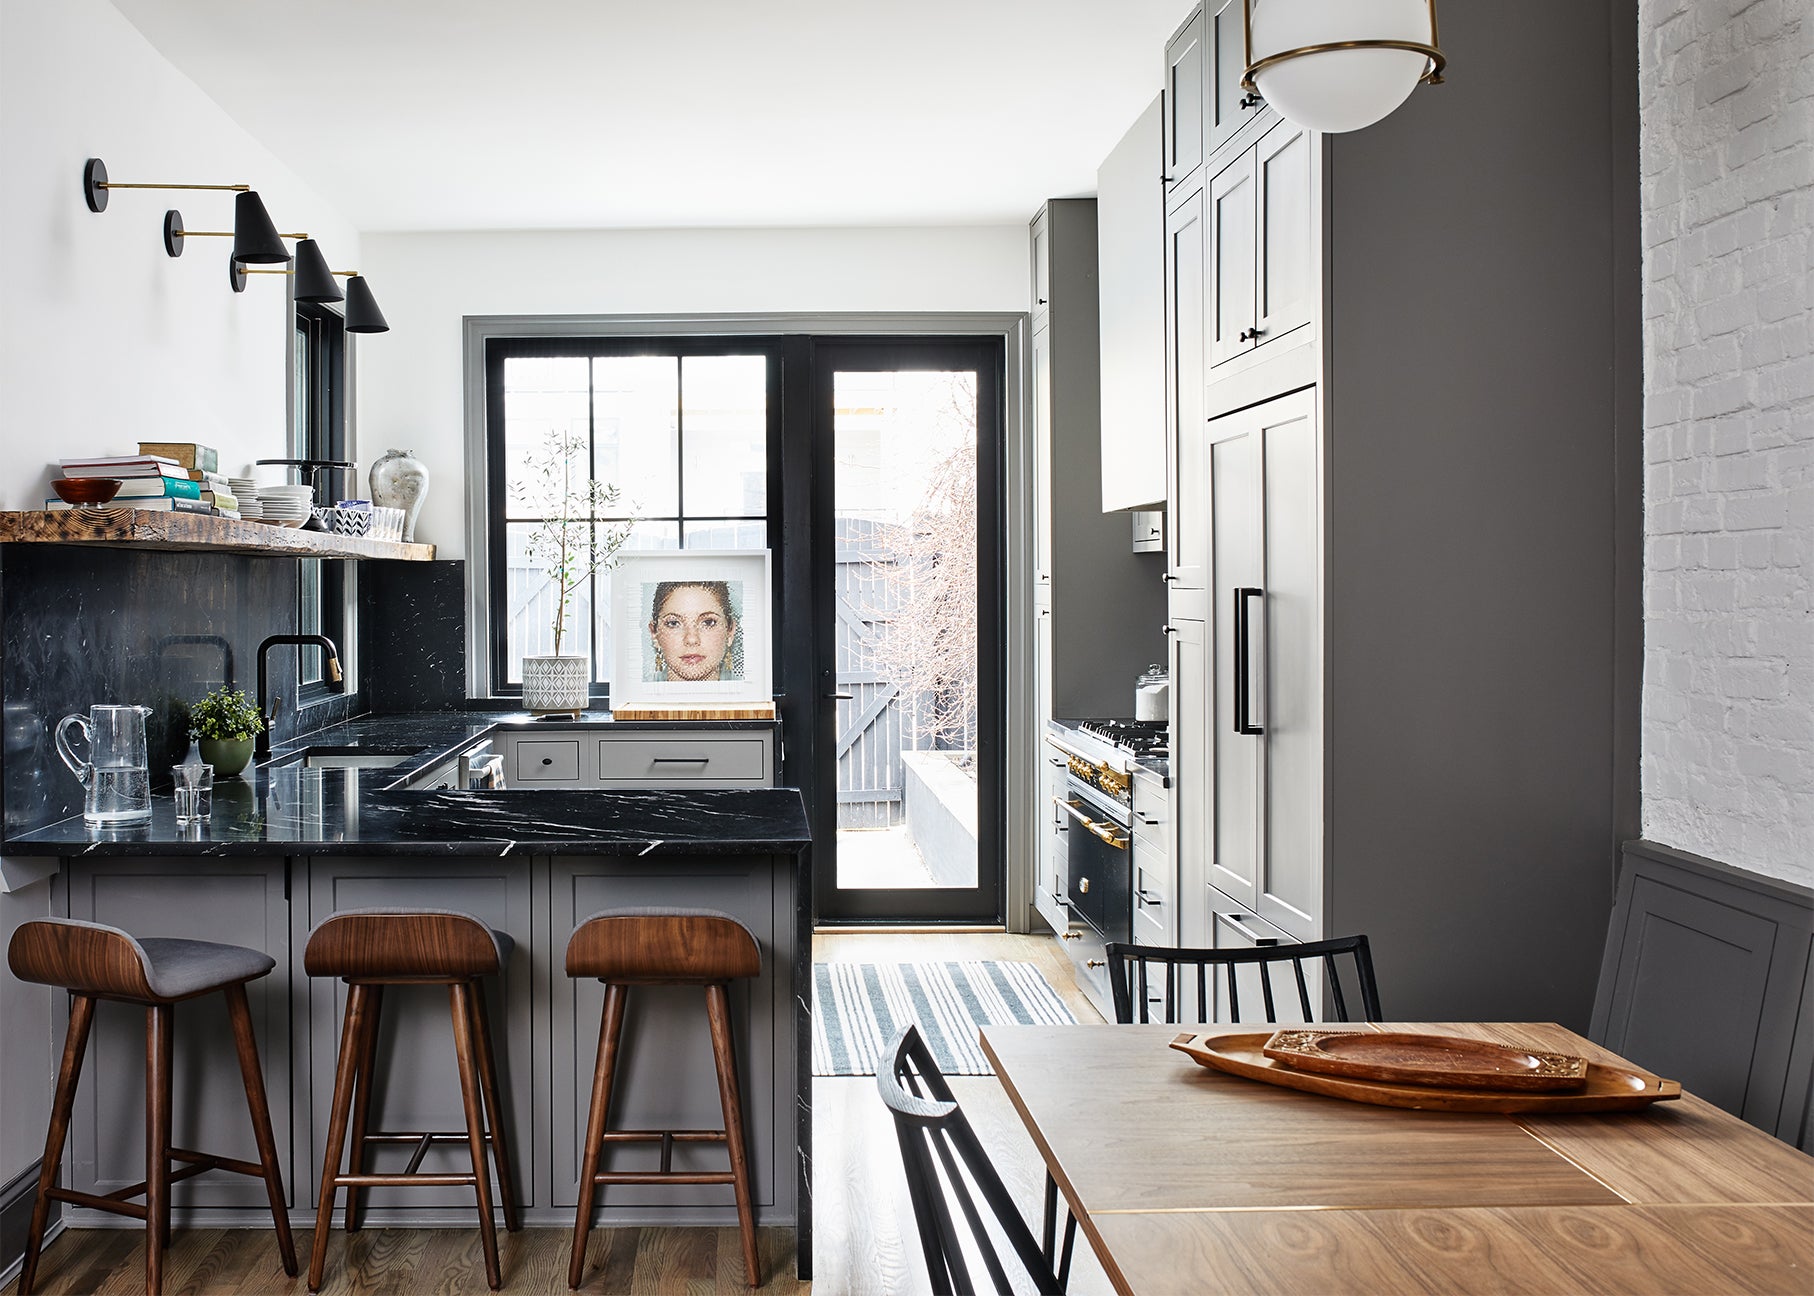 Gray kitchen with wood counter stools